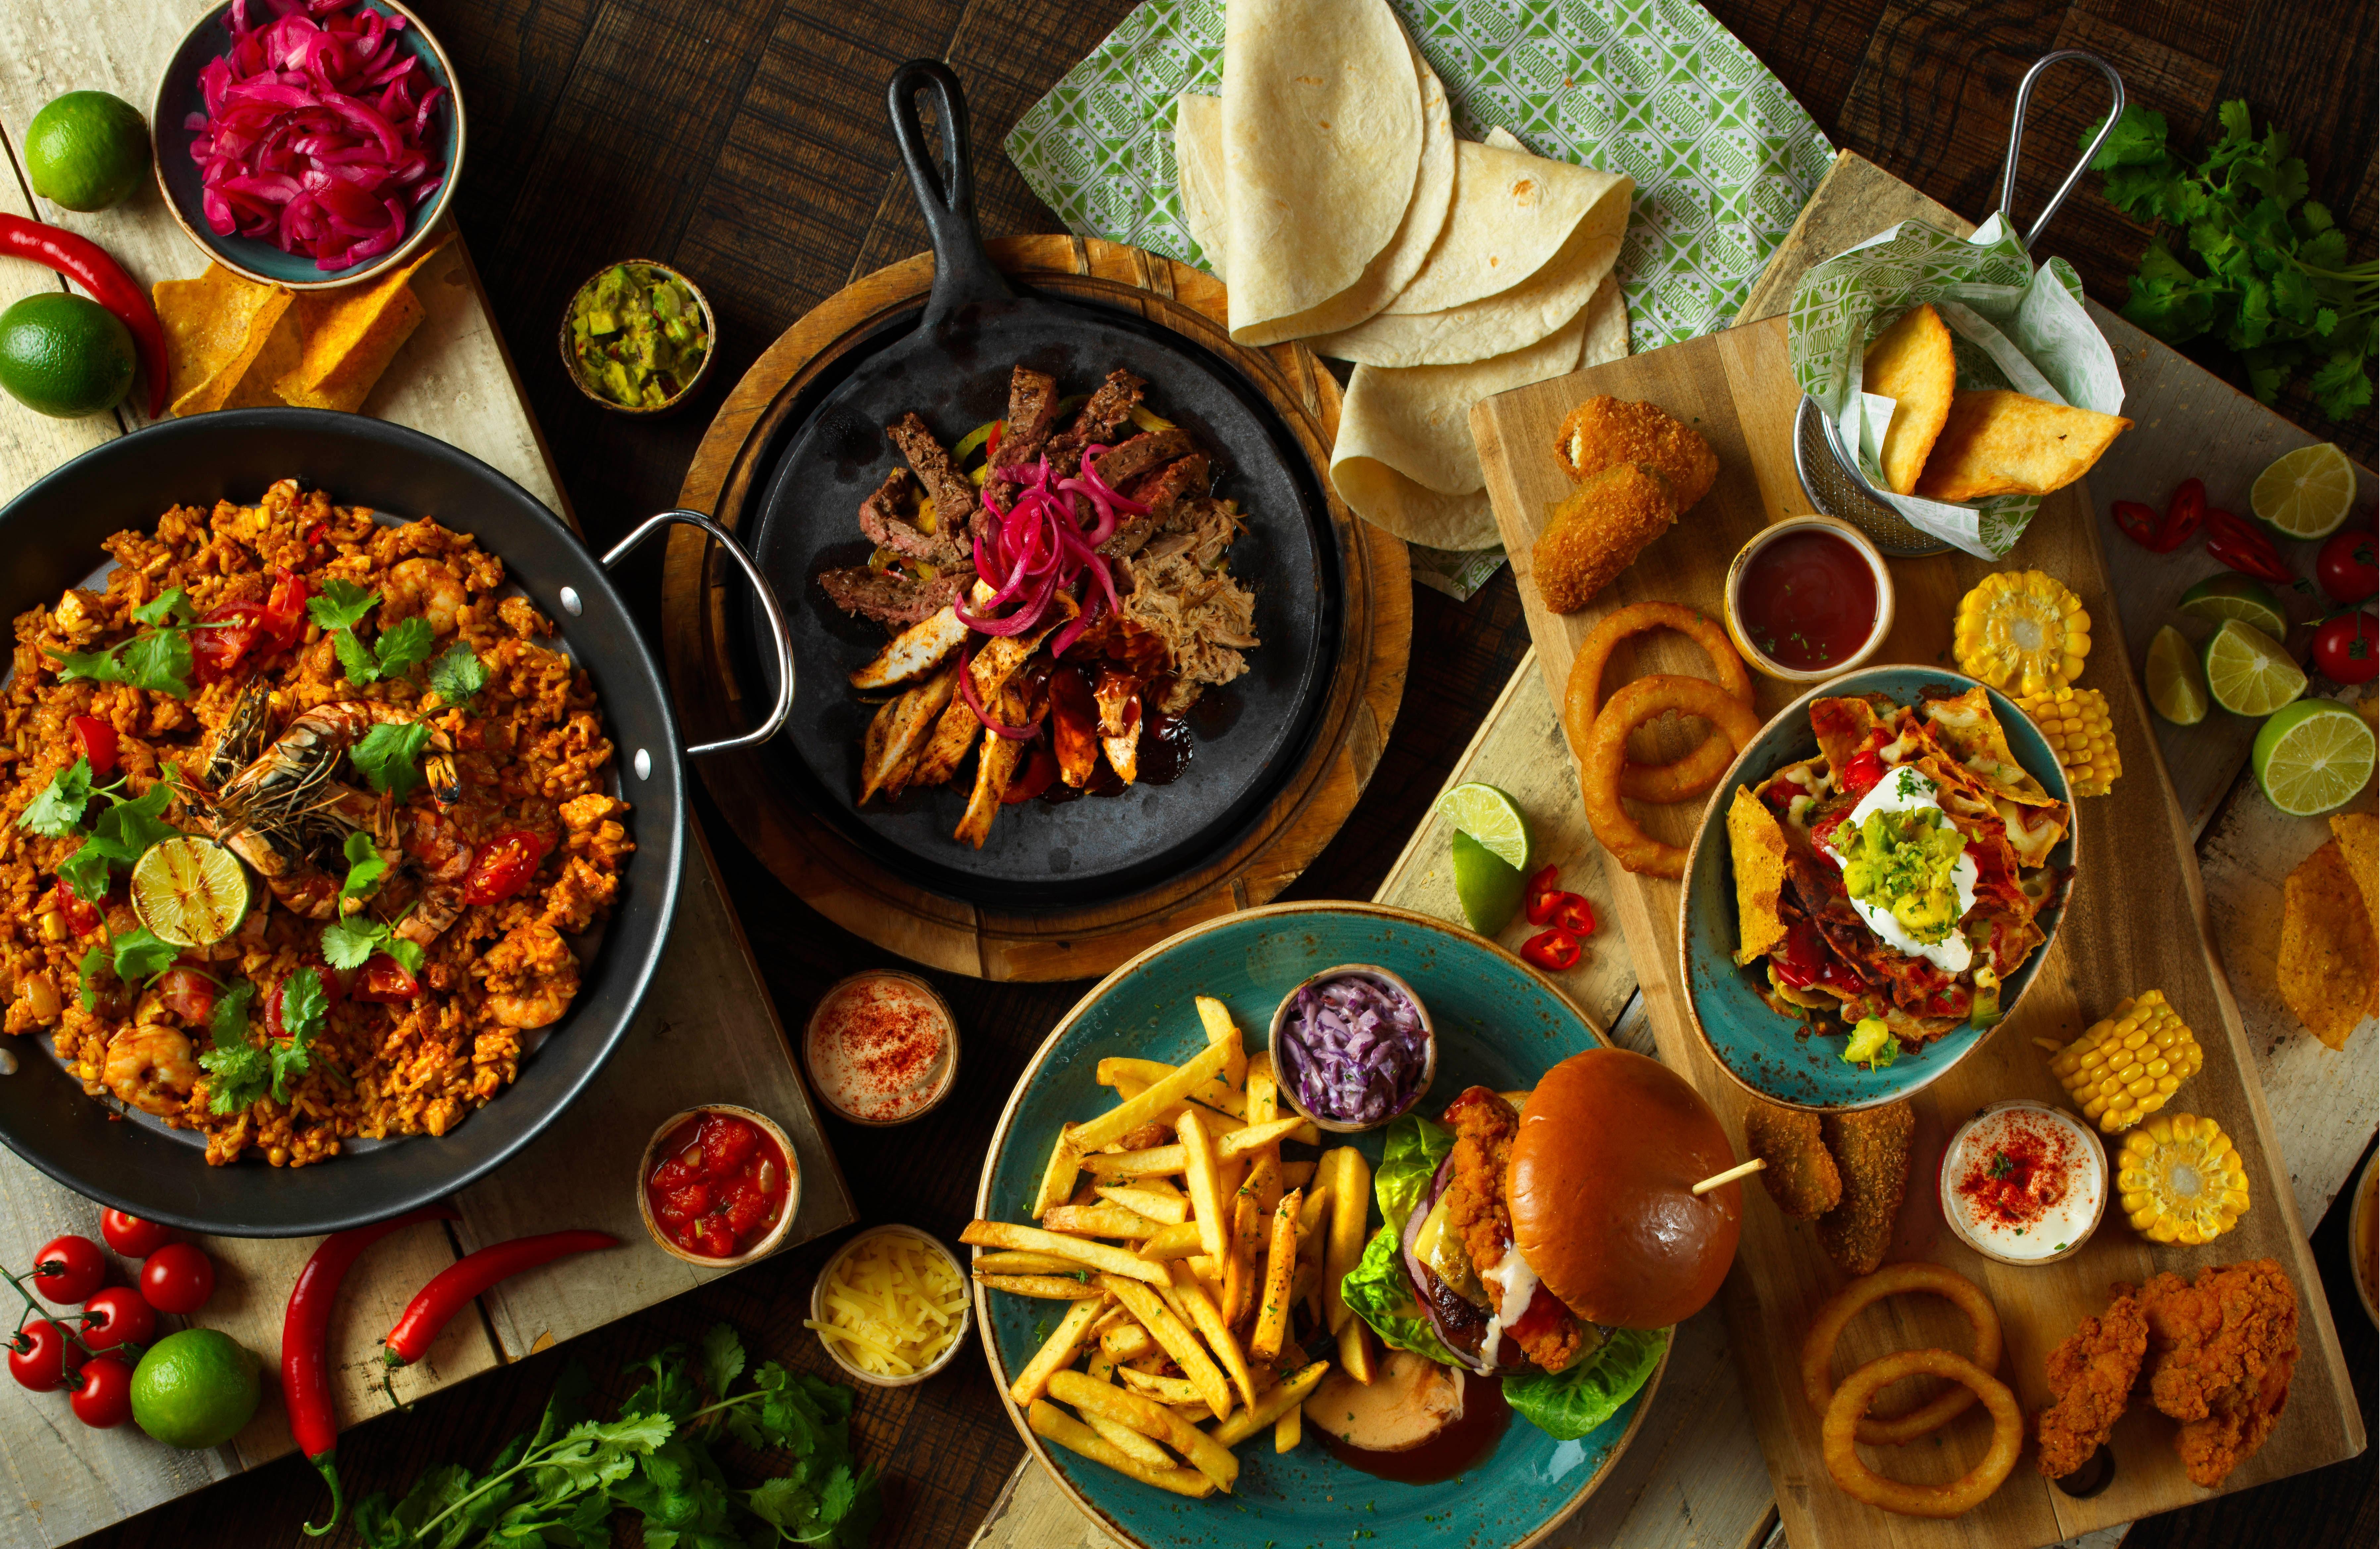 Chiquito Restaurant Bar & Mexican Grill Chiquito Broughton 01244 530564